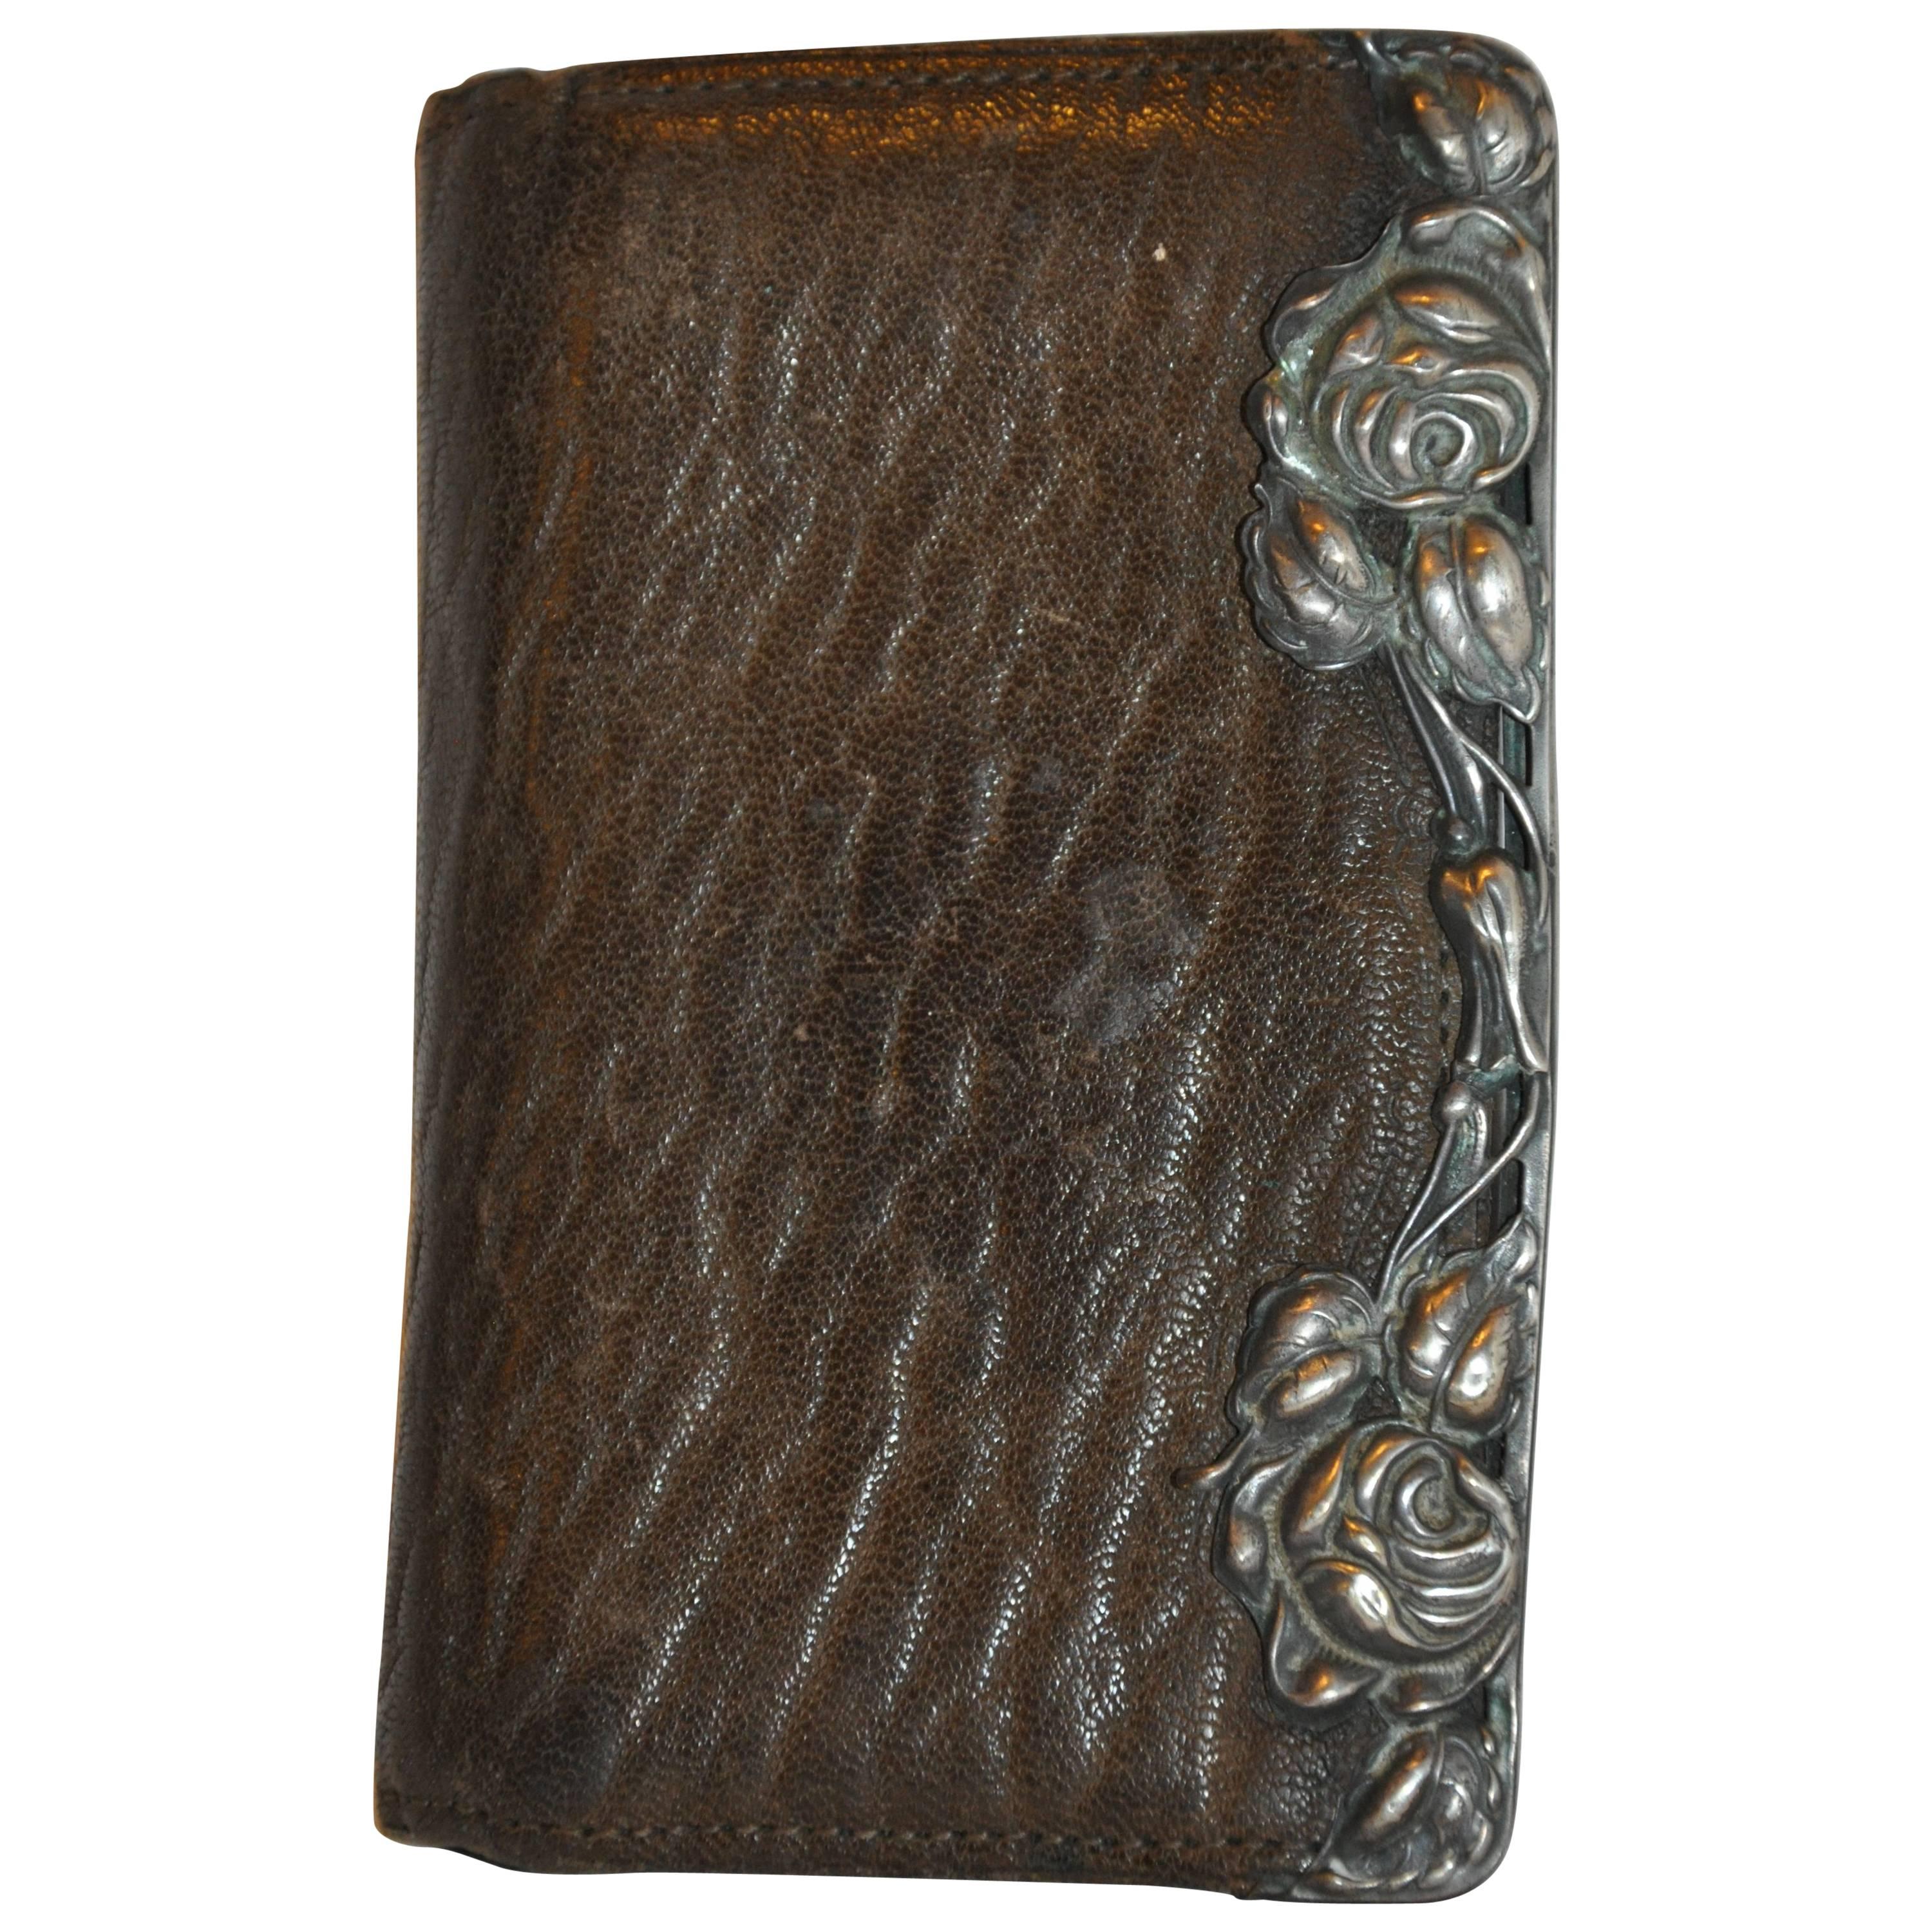 BuffaloSkin Wallet Detailed with Swirls Of Floral Sterling Silver Accent